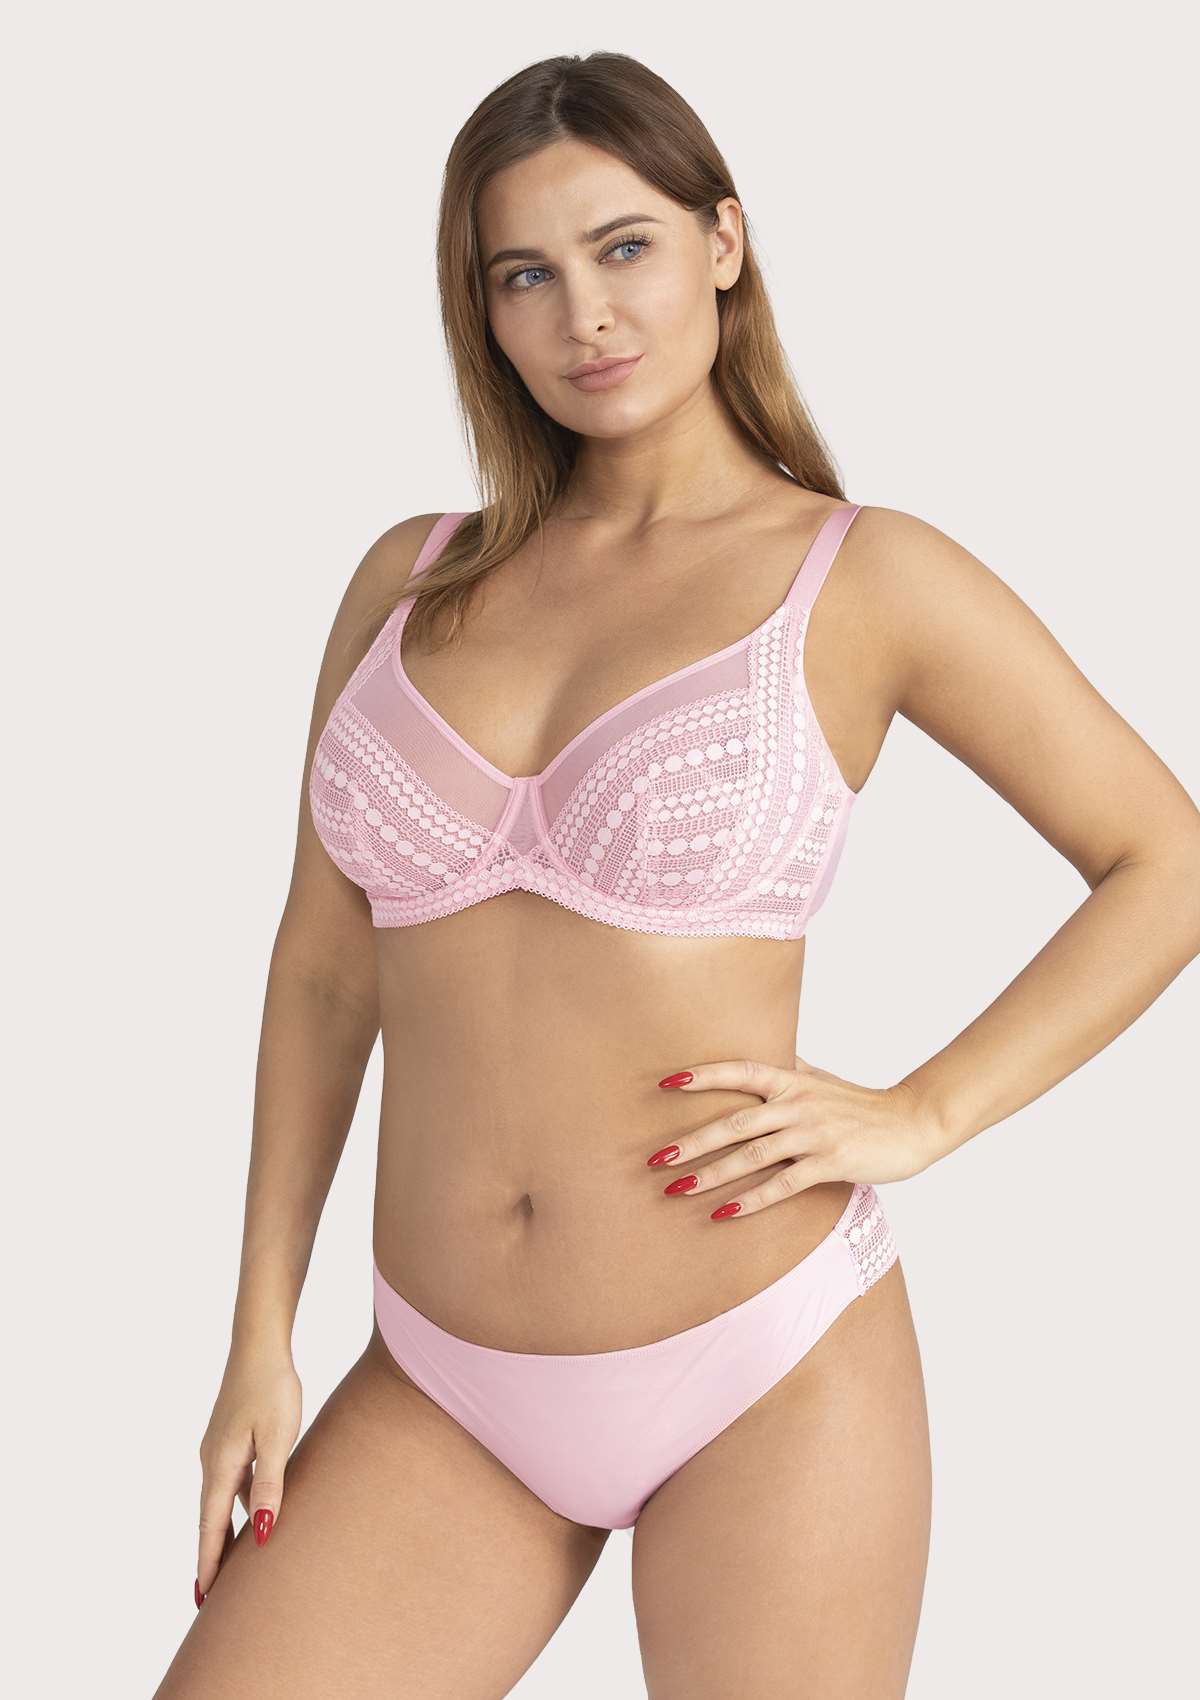 HSIA Heroine Lace Bra And Panties Set: Most Comfortable Supportive Bra - Pink / 36 / DD/E